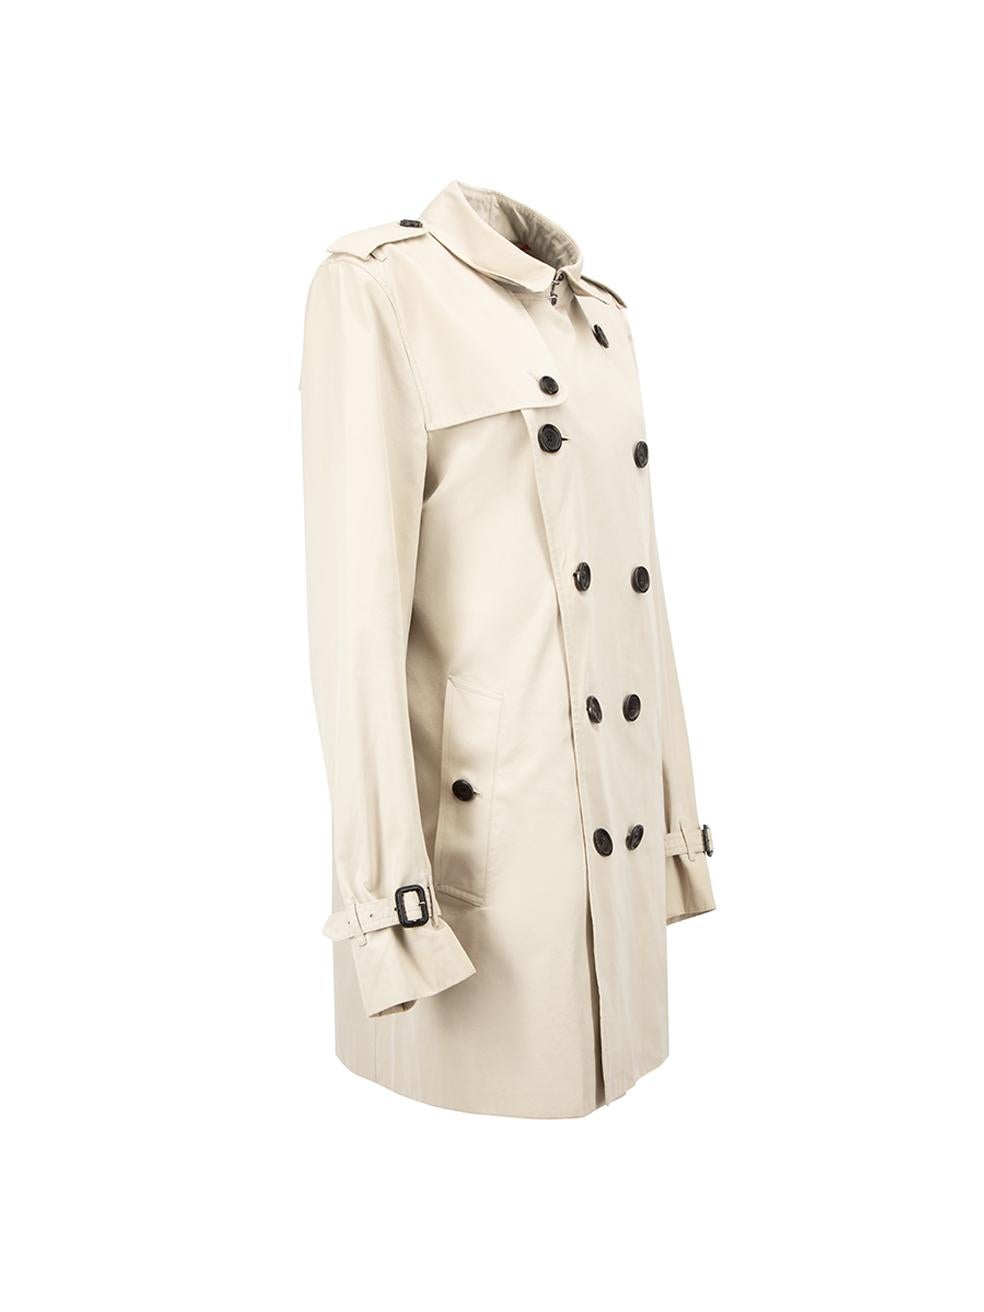 CONDITION is Very good. Minimal wear to coat is evident. Minimal wear to the outer fabric where some marks can be seen around the fourth buttons on this used Burberry designer resale item. 
 
 Details
  Beige
 Cotton
 Mid length trench coat
 Double